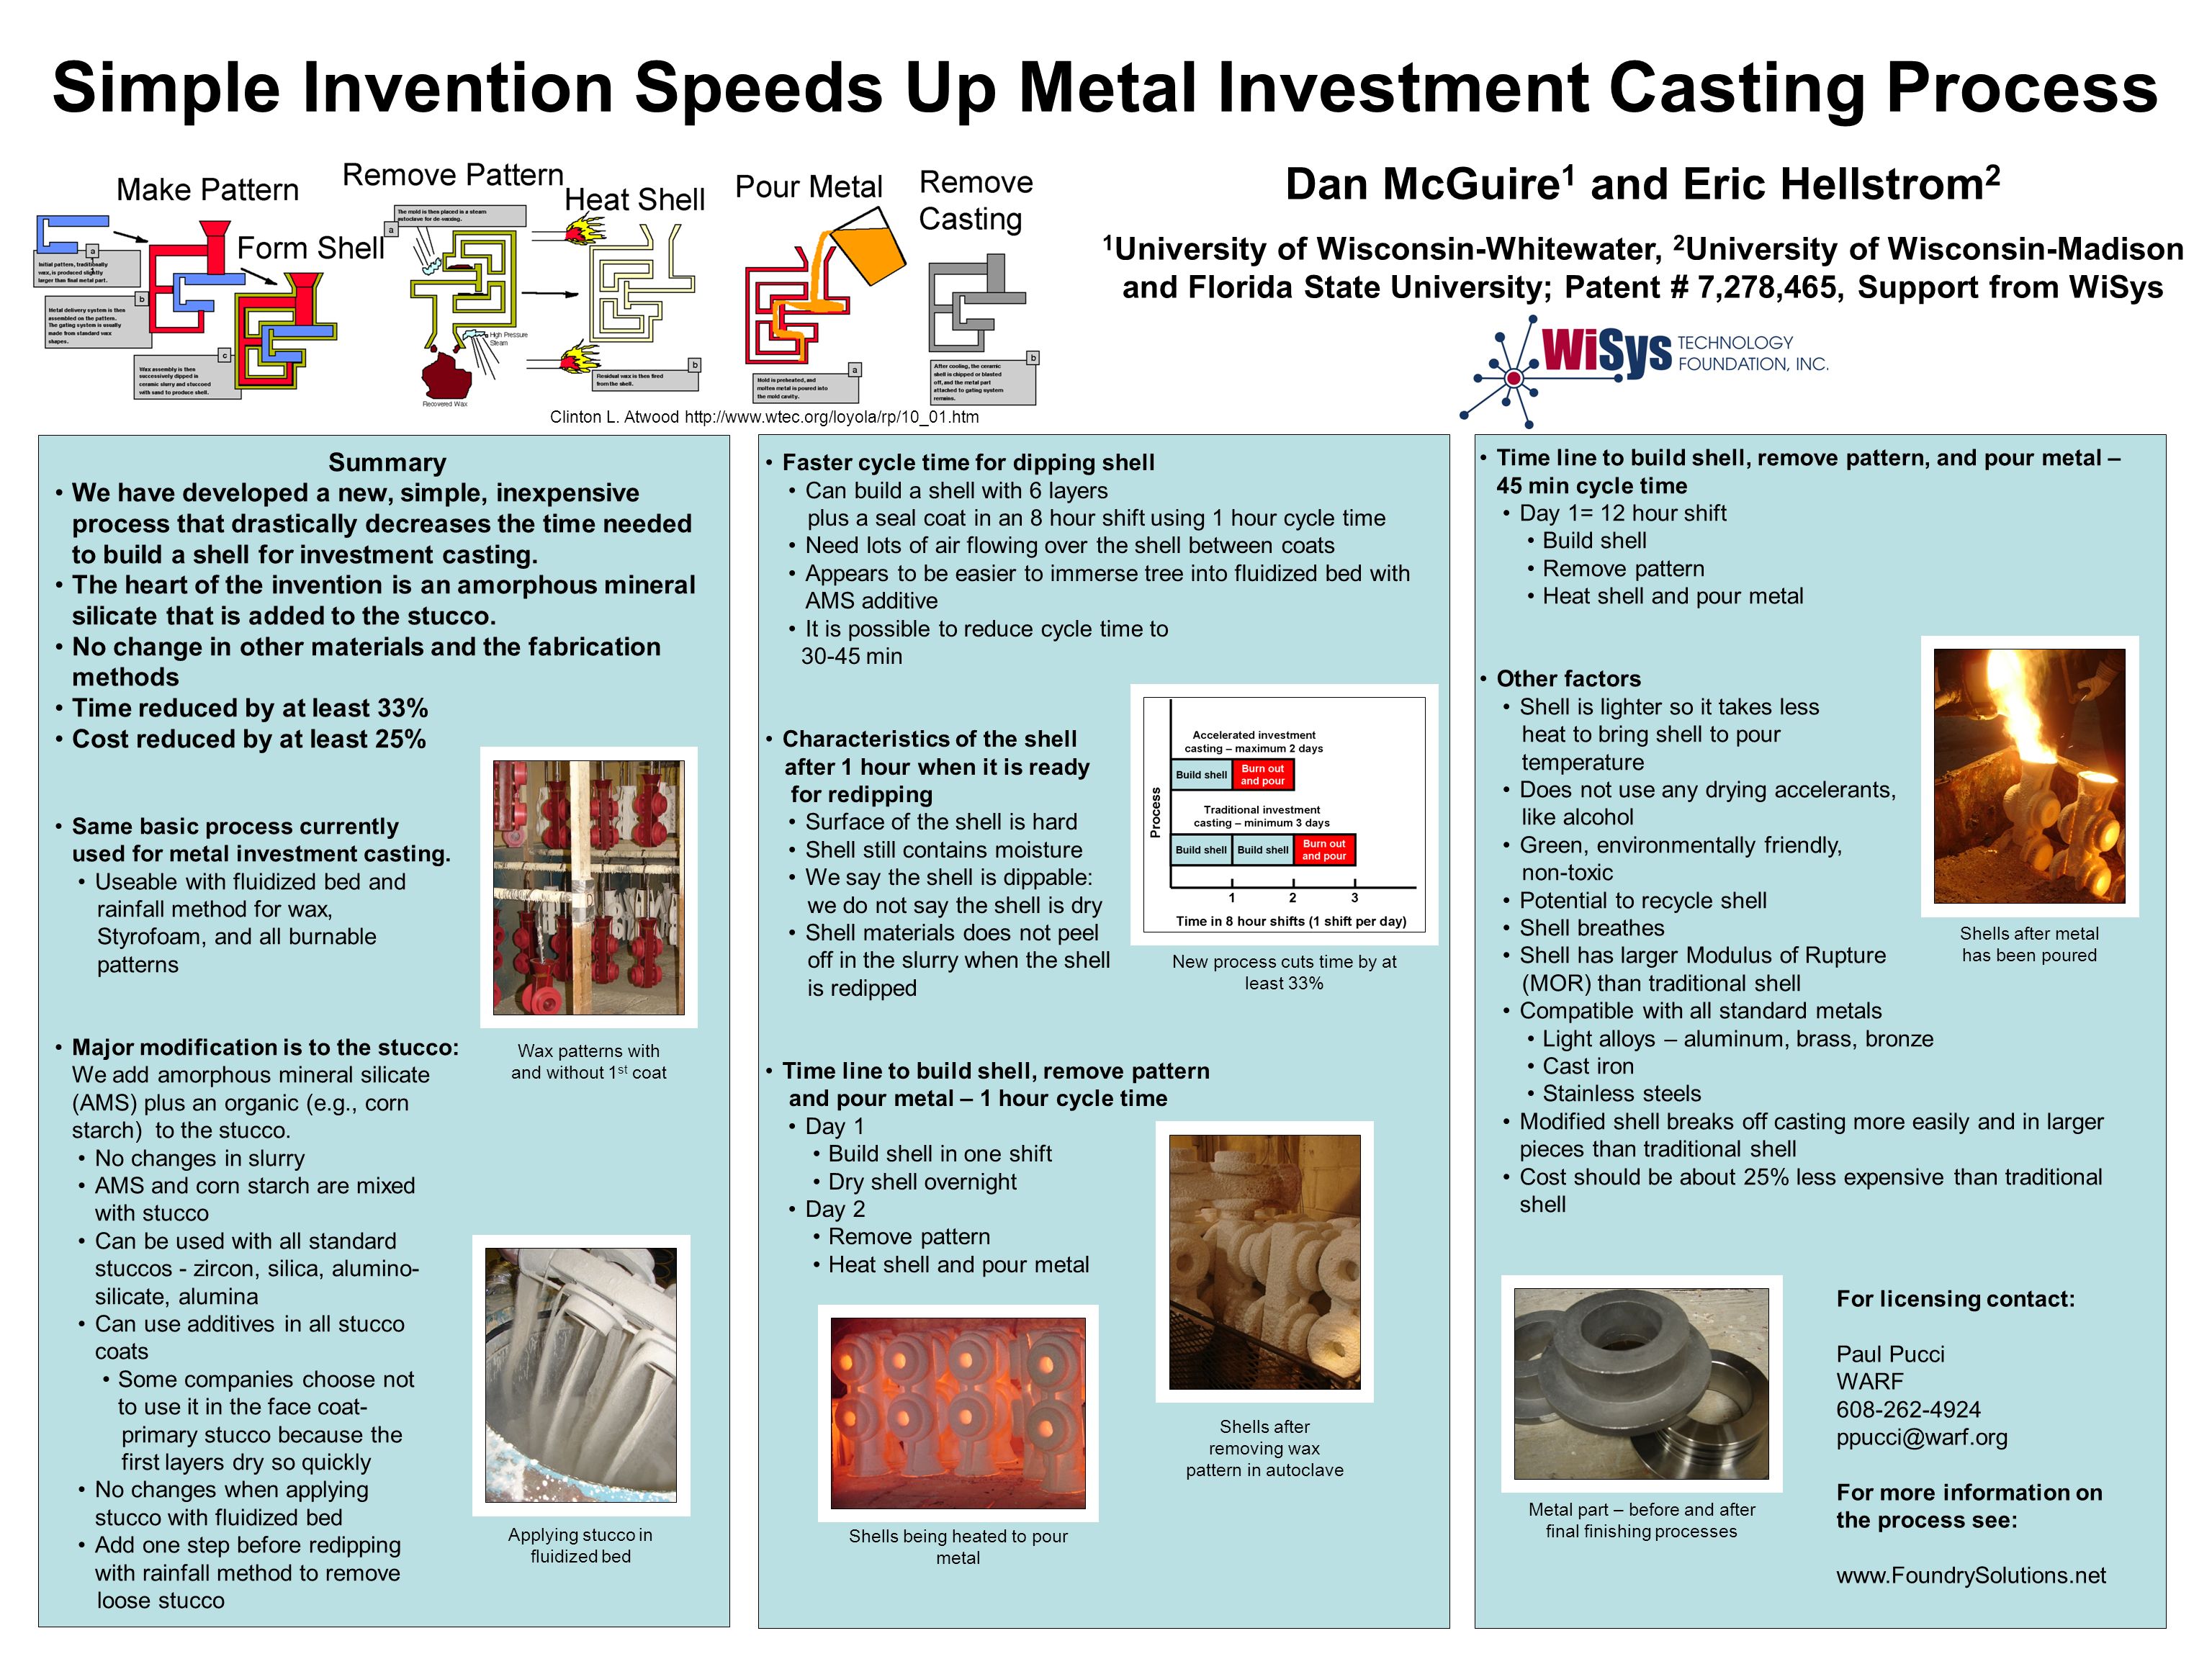 Simply invents. Investment casting Shell removal. Simple Inventions.